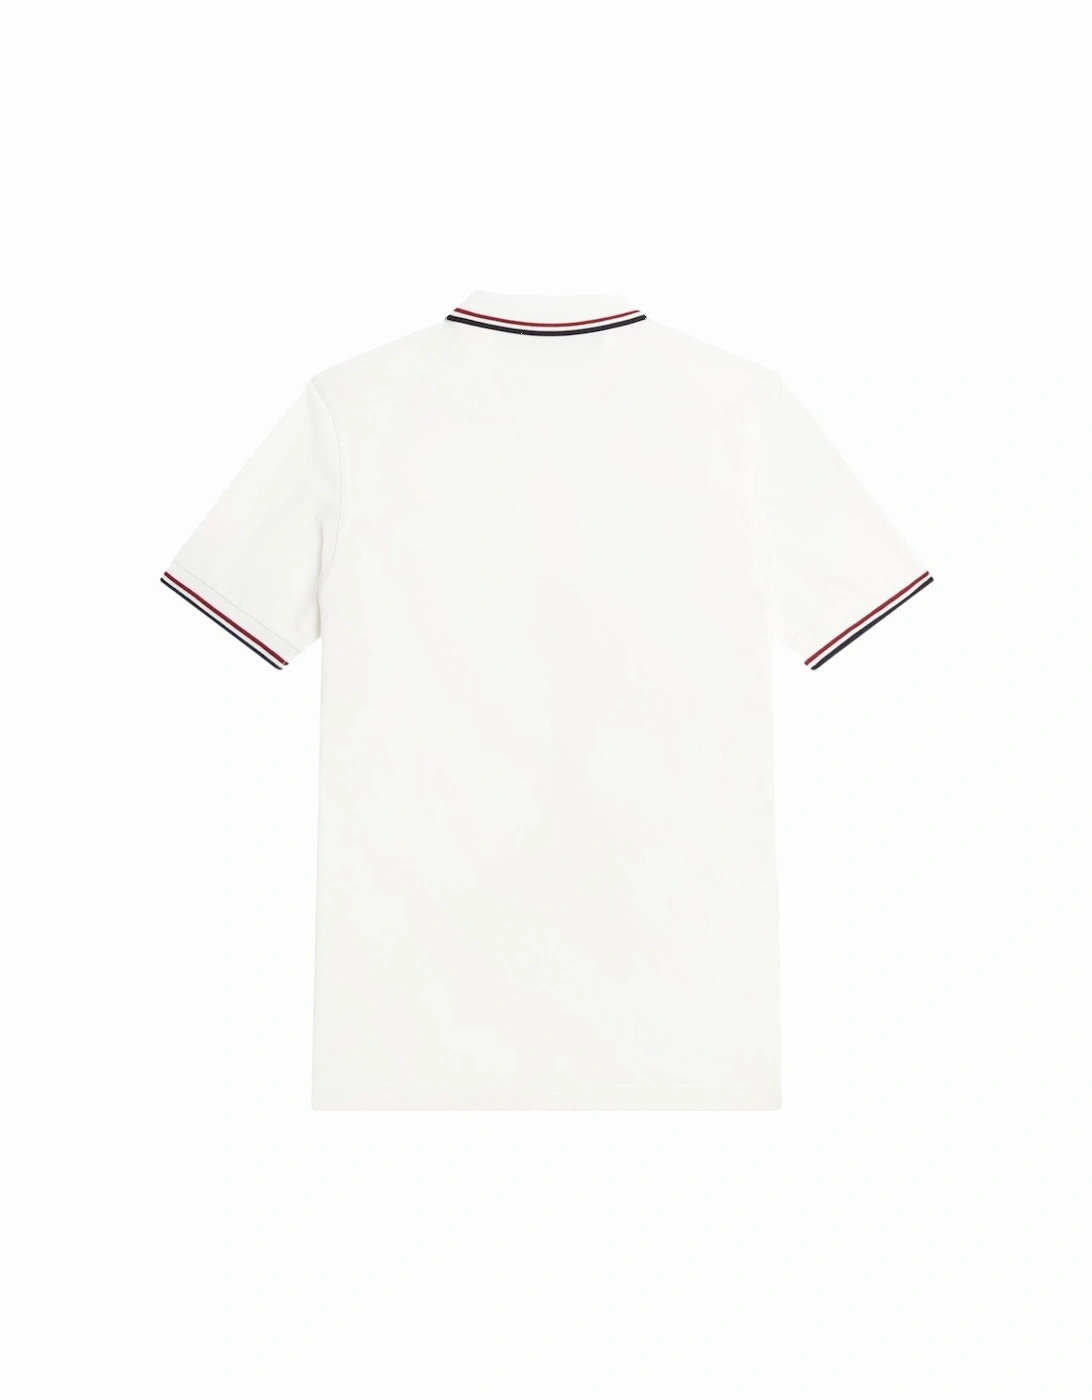 M3600 Twin Tipped FP SS Polo - White/Red/Navy